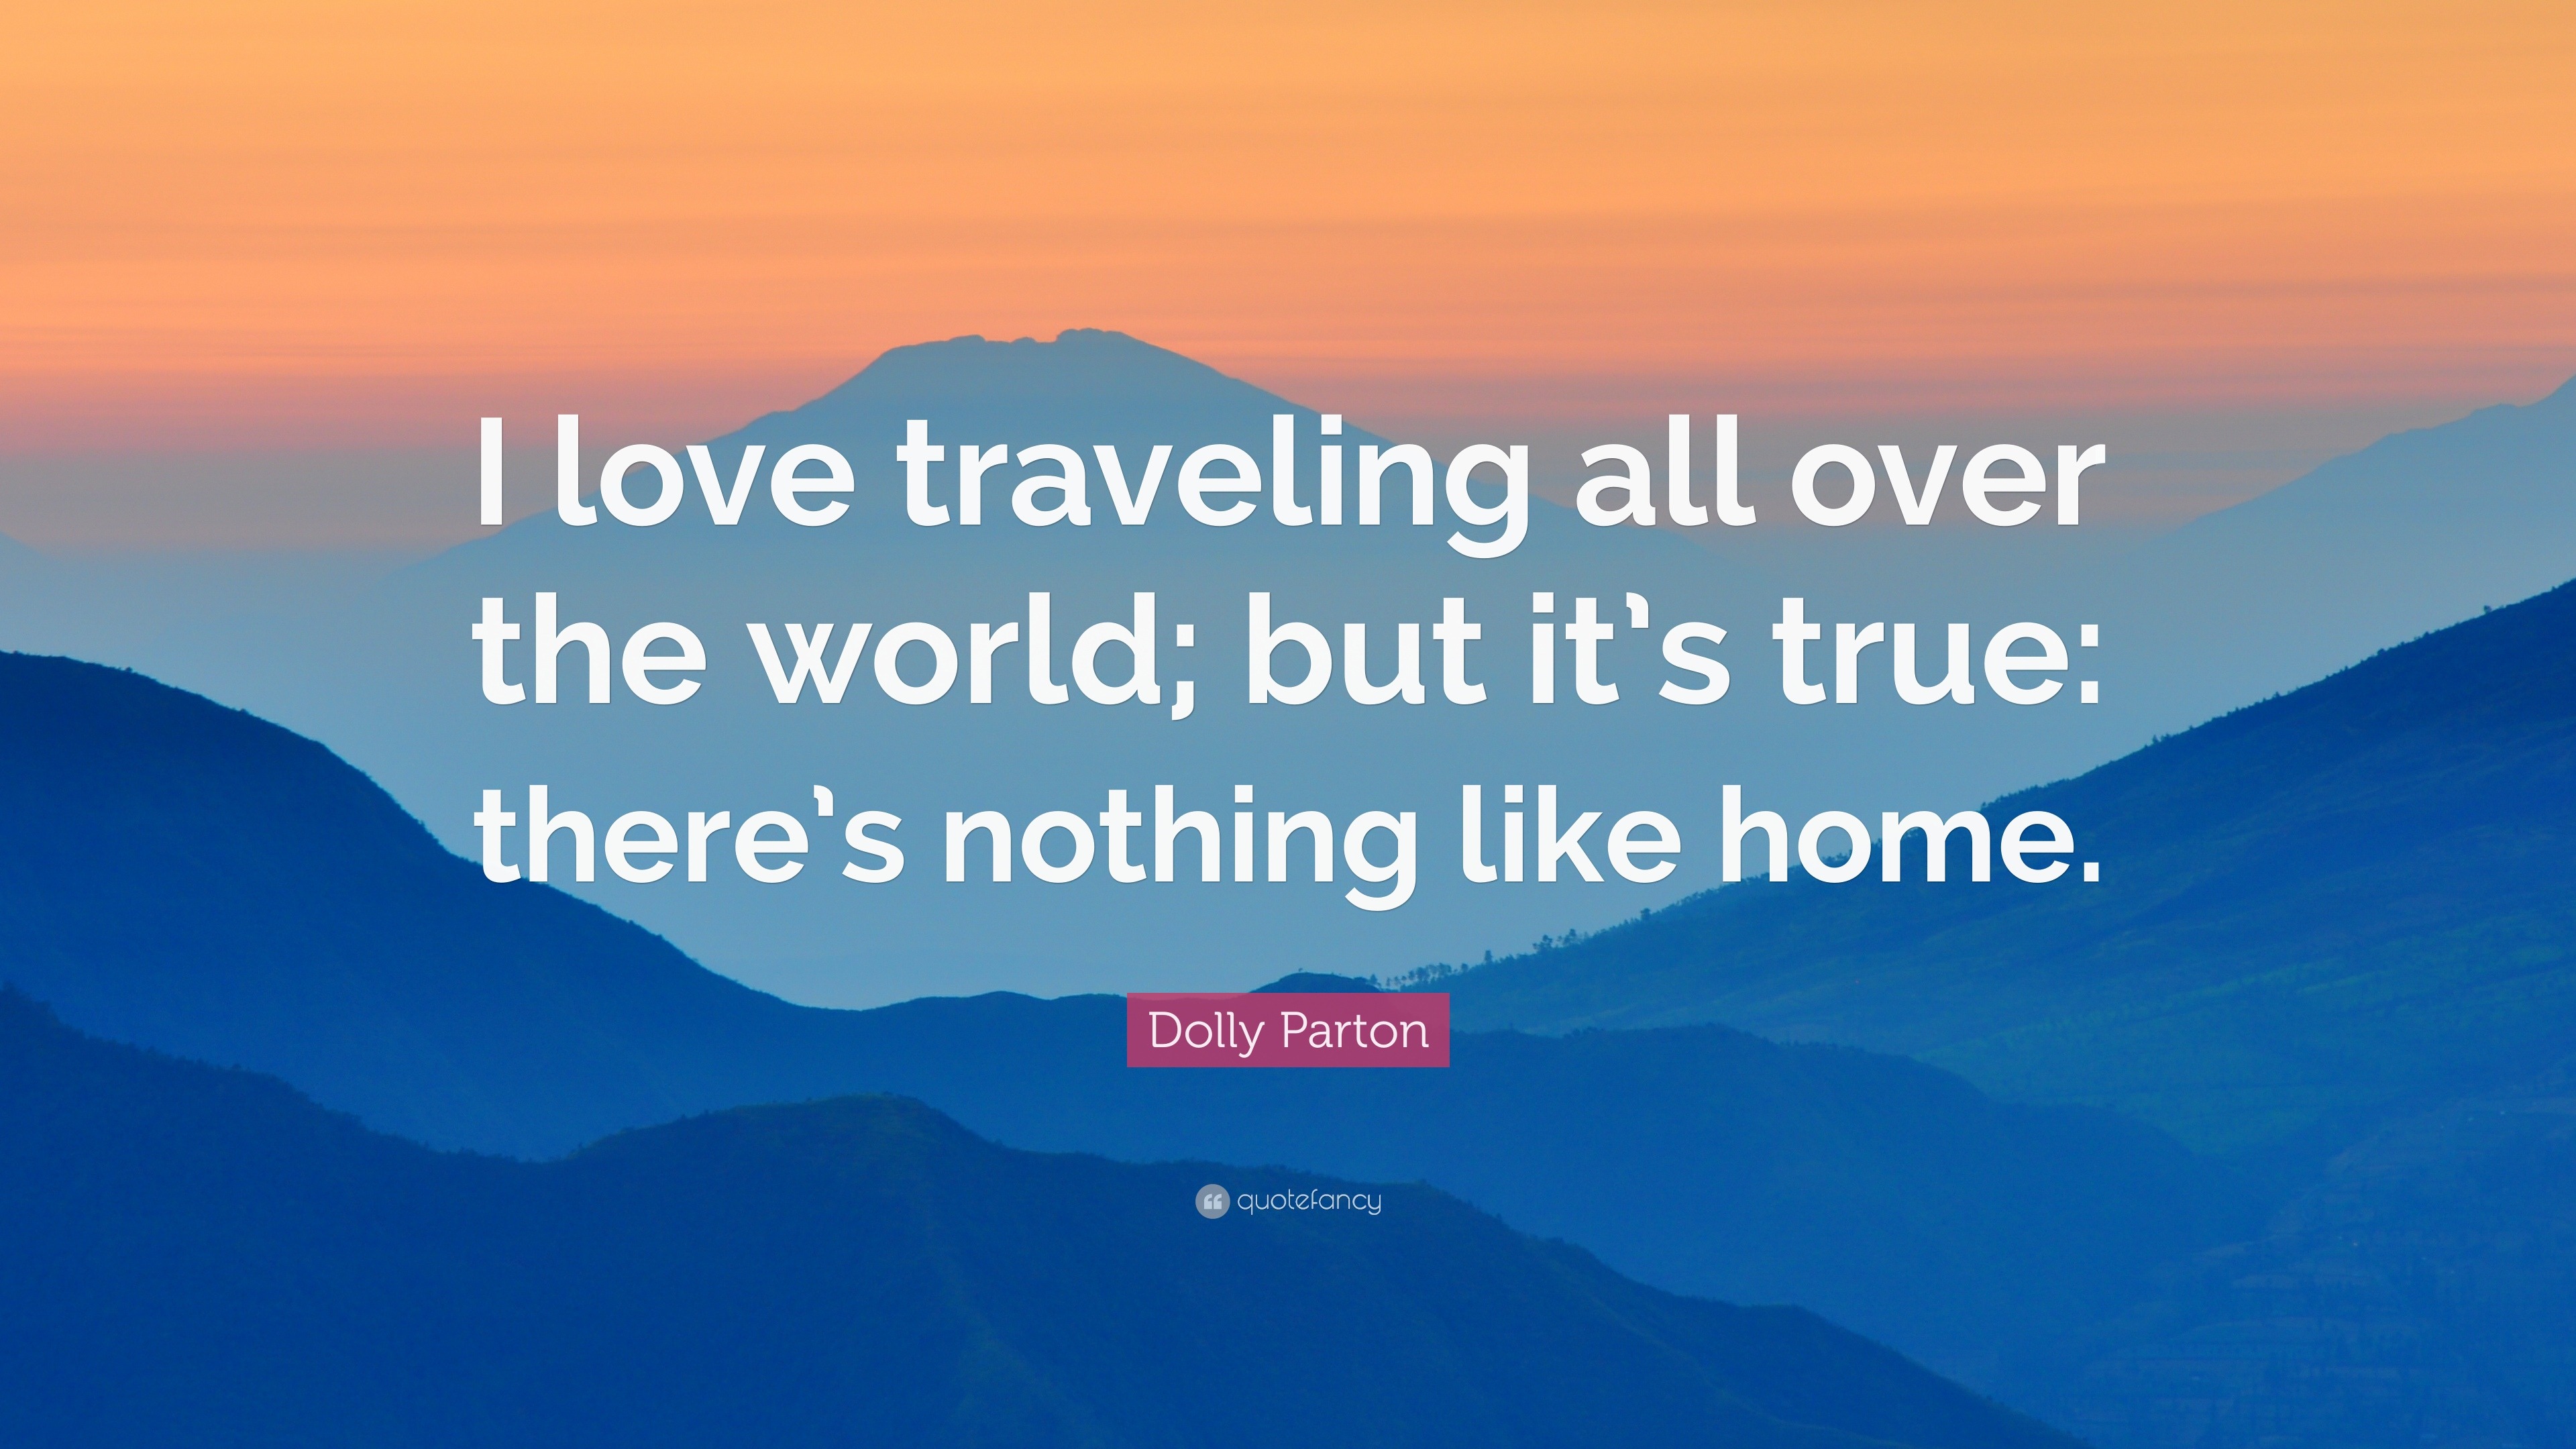 Dolly Parton Quote: “I love traveling all over the world; but it’s true ...